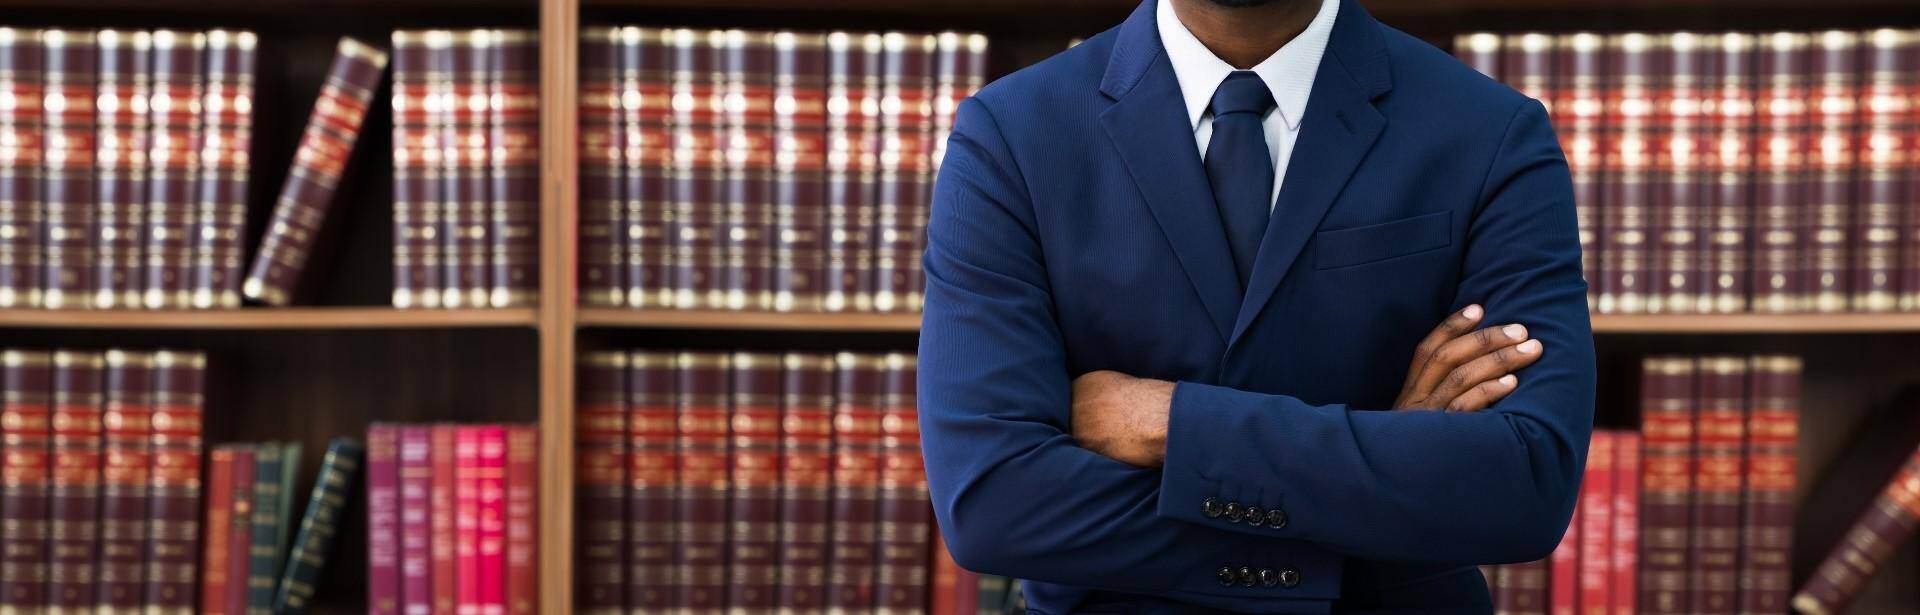 A black lawyer standing in front of a bookshelf of law book in LaGrange, Georgia